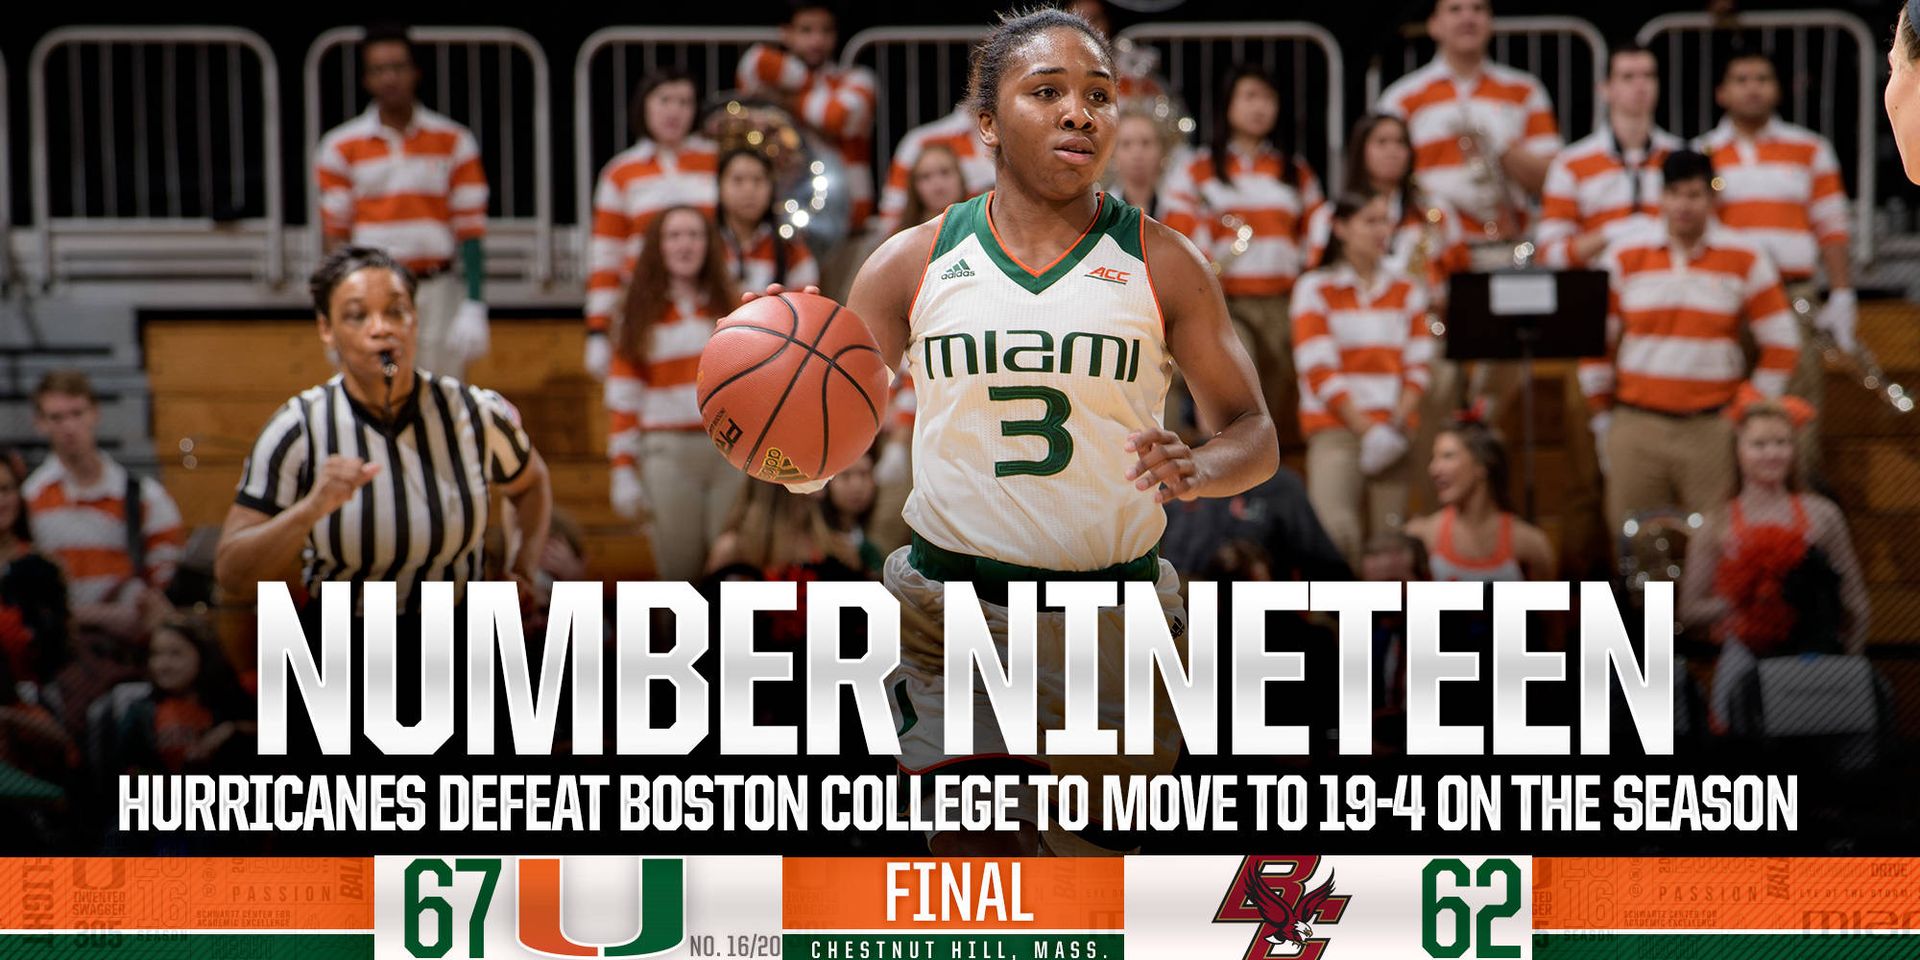 Free Throws Spark @CanesWBB to Win at BC